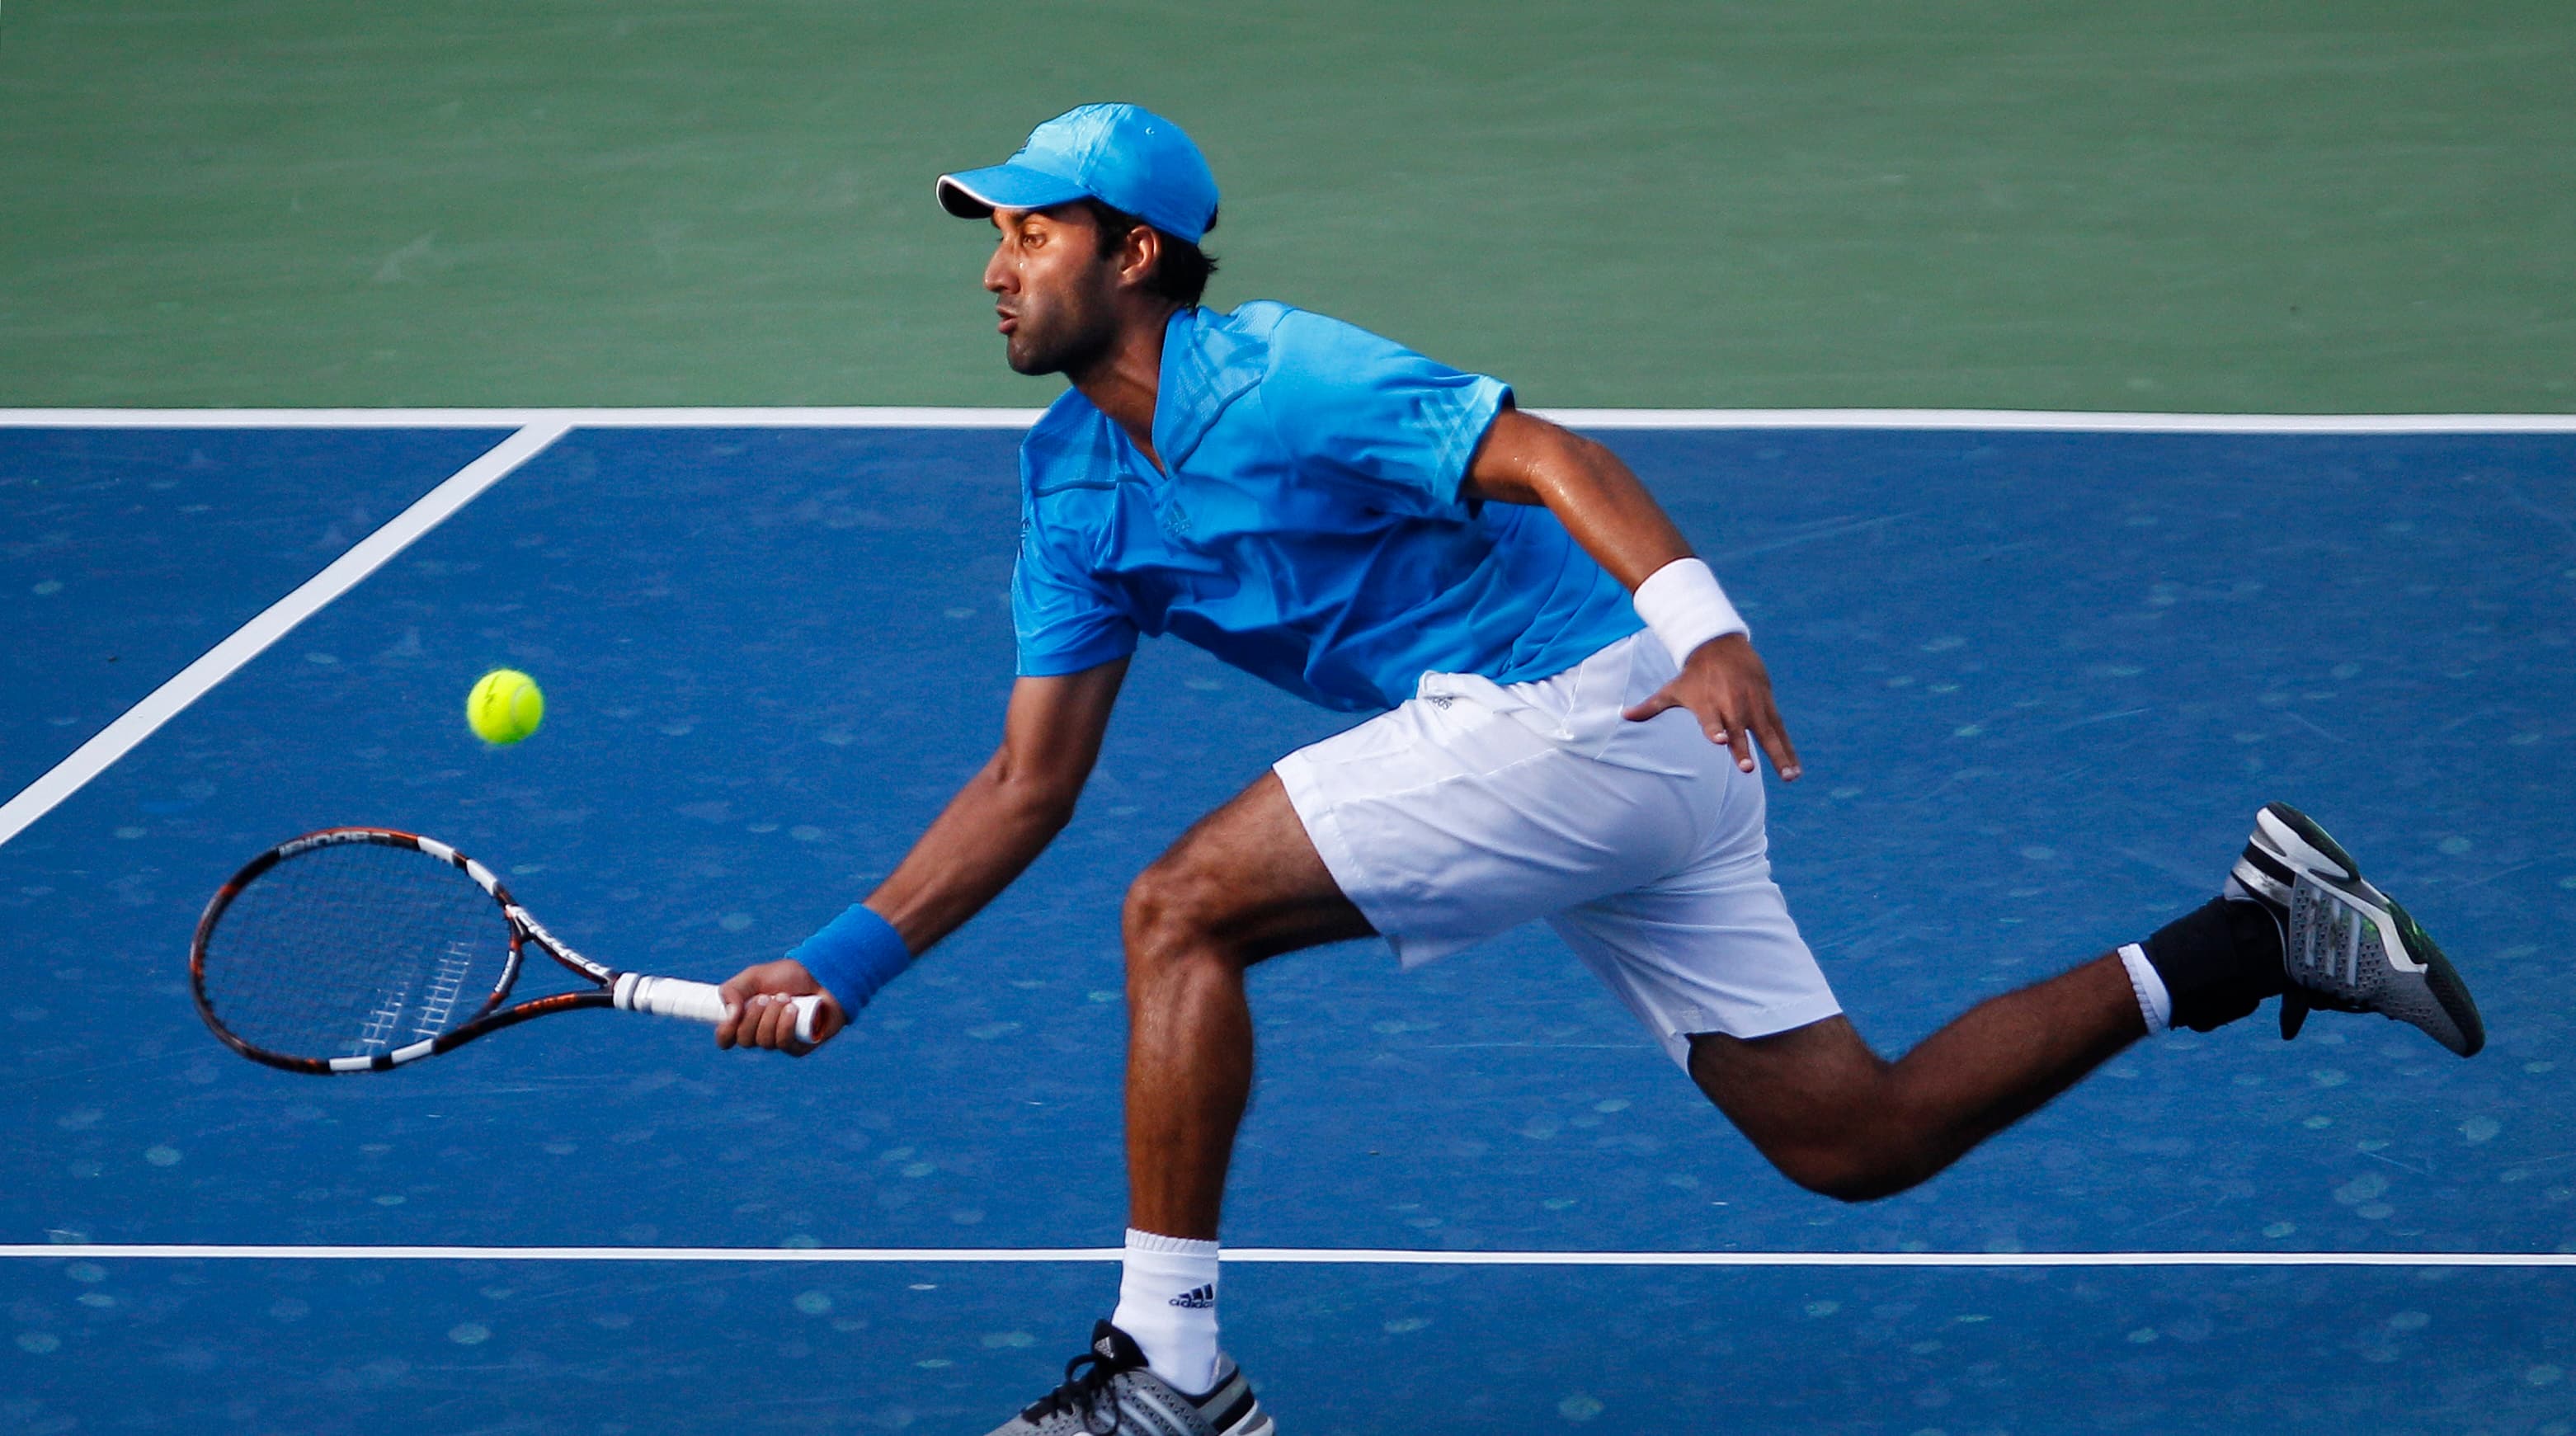 Yuki Bhambri in both singles, doubles semi-finals at Kaohsiung ATP Challenger